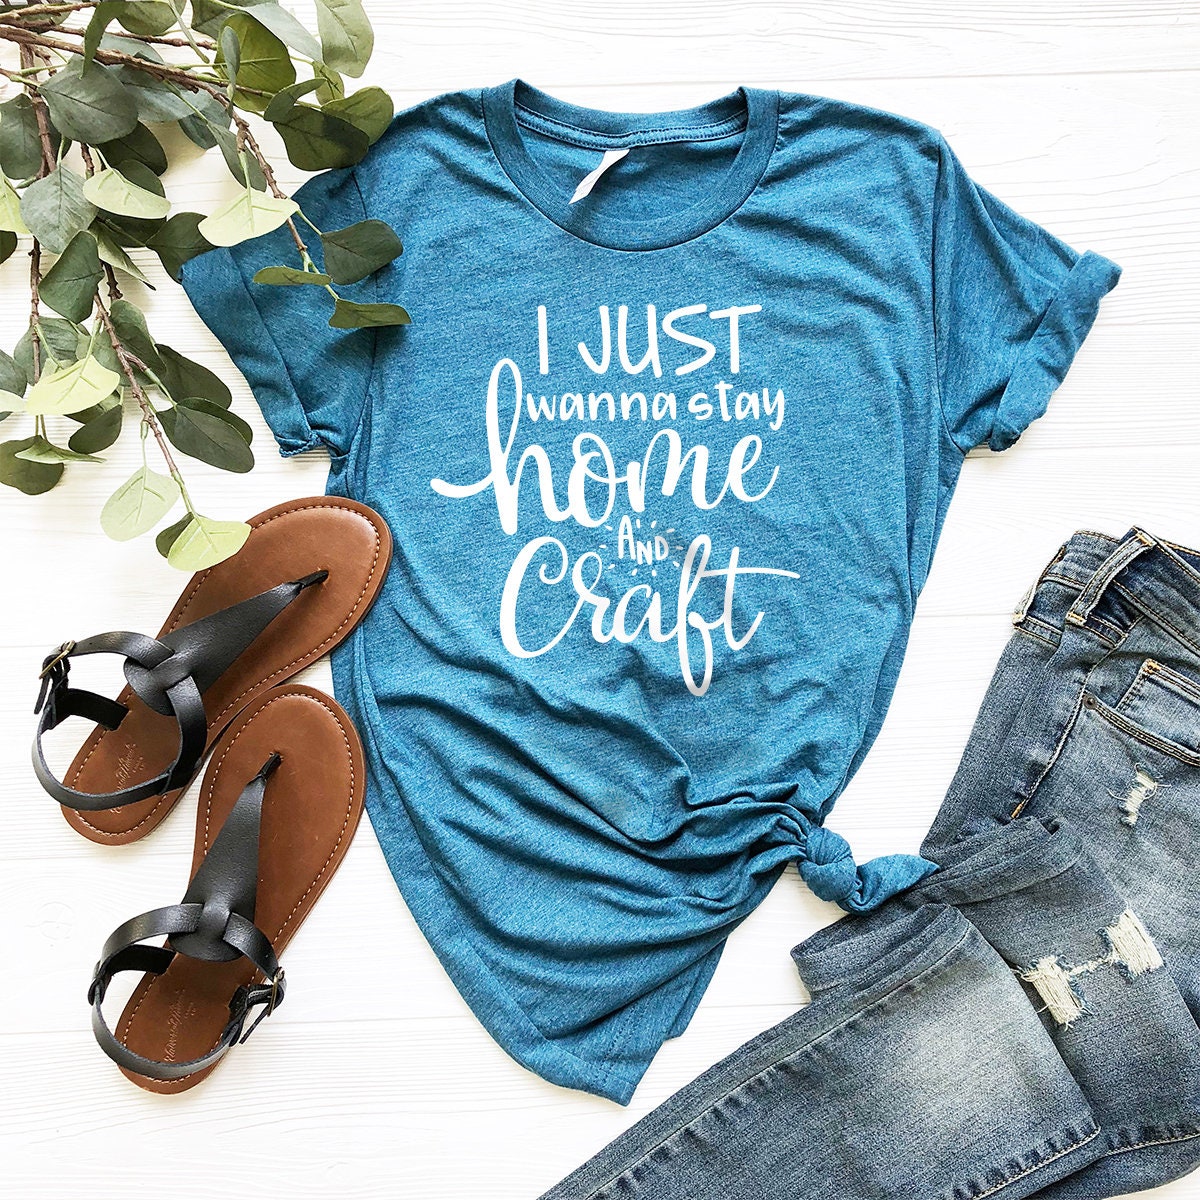 Crafting T-Shirt, Funny Craft Hobby Shirt, Gift For Crafter, Crafter Shirt, Crafter Gift, I Just Wanna Stay Home And Craft Tee - Fastdeliverytees.com